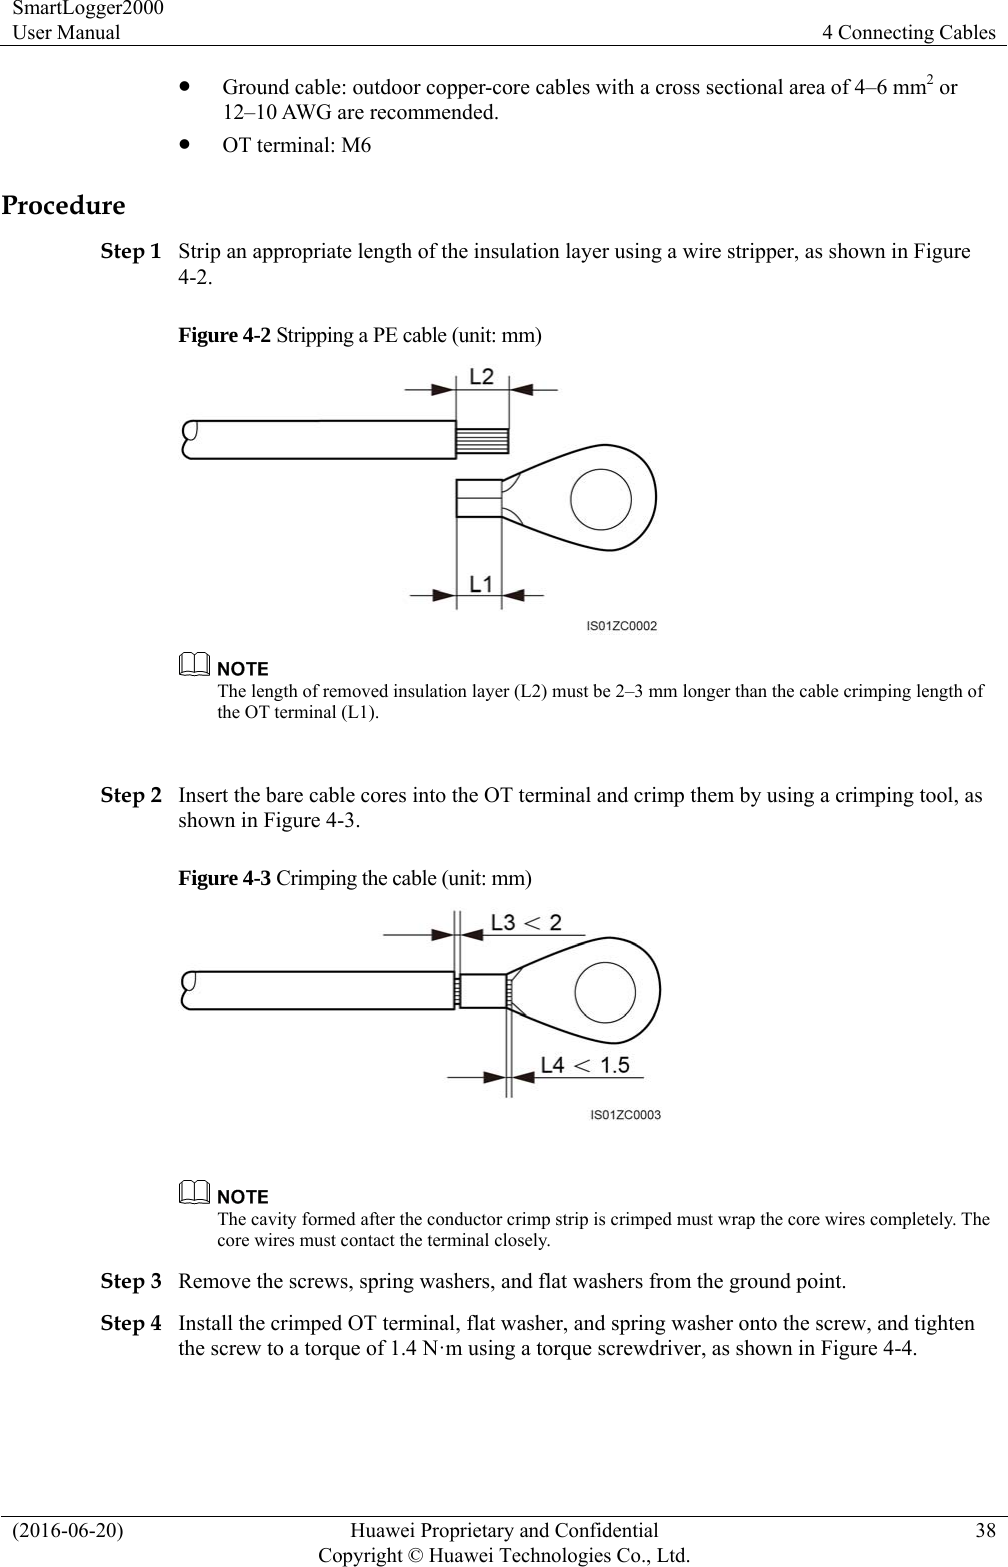 SmartLogger2000 User Manual  4 Connecting Cables (2016-06-20)  Huawei Proprietary and Confidential         Copyright © Huawei Technologies Co., Ltd.38  Ground cable: outdoor copper-core cables with a cross sectional area of 4–6 mm2 or 12–10 AWG are recommended.  OT terminal: M6 Procedure Step 1 Strip an appropriate length of the insulation layer using a wire stripper, as shown in Figure 4-2. Figure 4-2 Stripping a PE cable (unit: mm)   The length of removed insulation layer (L2) must be 2–3 mm longer than the cable crimping length of the OT terminal (L1).    Step 2 Insert the bare cable cores into the OT terminal and crimp them by using a crimping tool, as shown in Figure 4-3. Figure 4-3 Crimping the cable (unit: mm)    The cavity formed after the conductor crimp strip is crimped must wrap the core wires completely. The core wires must contact the terminal closely. Step 3 Remove the screws, spring washers, and flat washers from the ground point.   Step 4 Install the crimped OT terminal, flat washer, and spring washer onto the screw, and tighten the screw to a torque of 1.4 N·m using a torque screwdriver, as shown in Figure 4-4. 